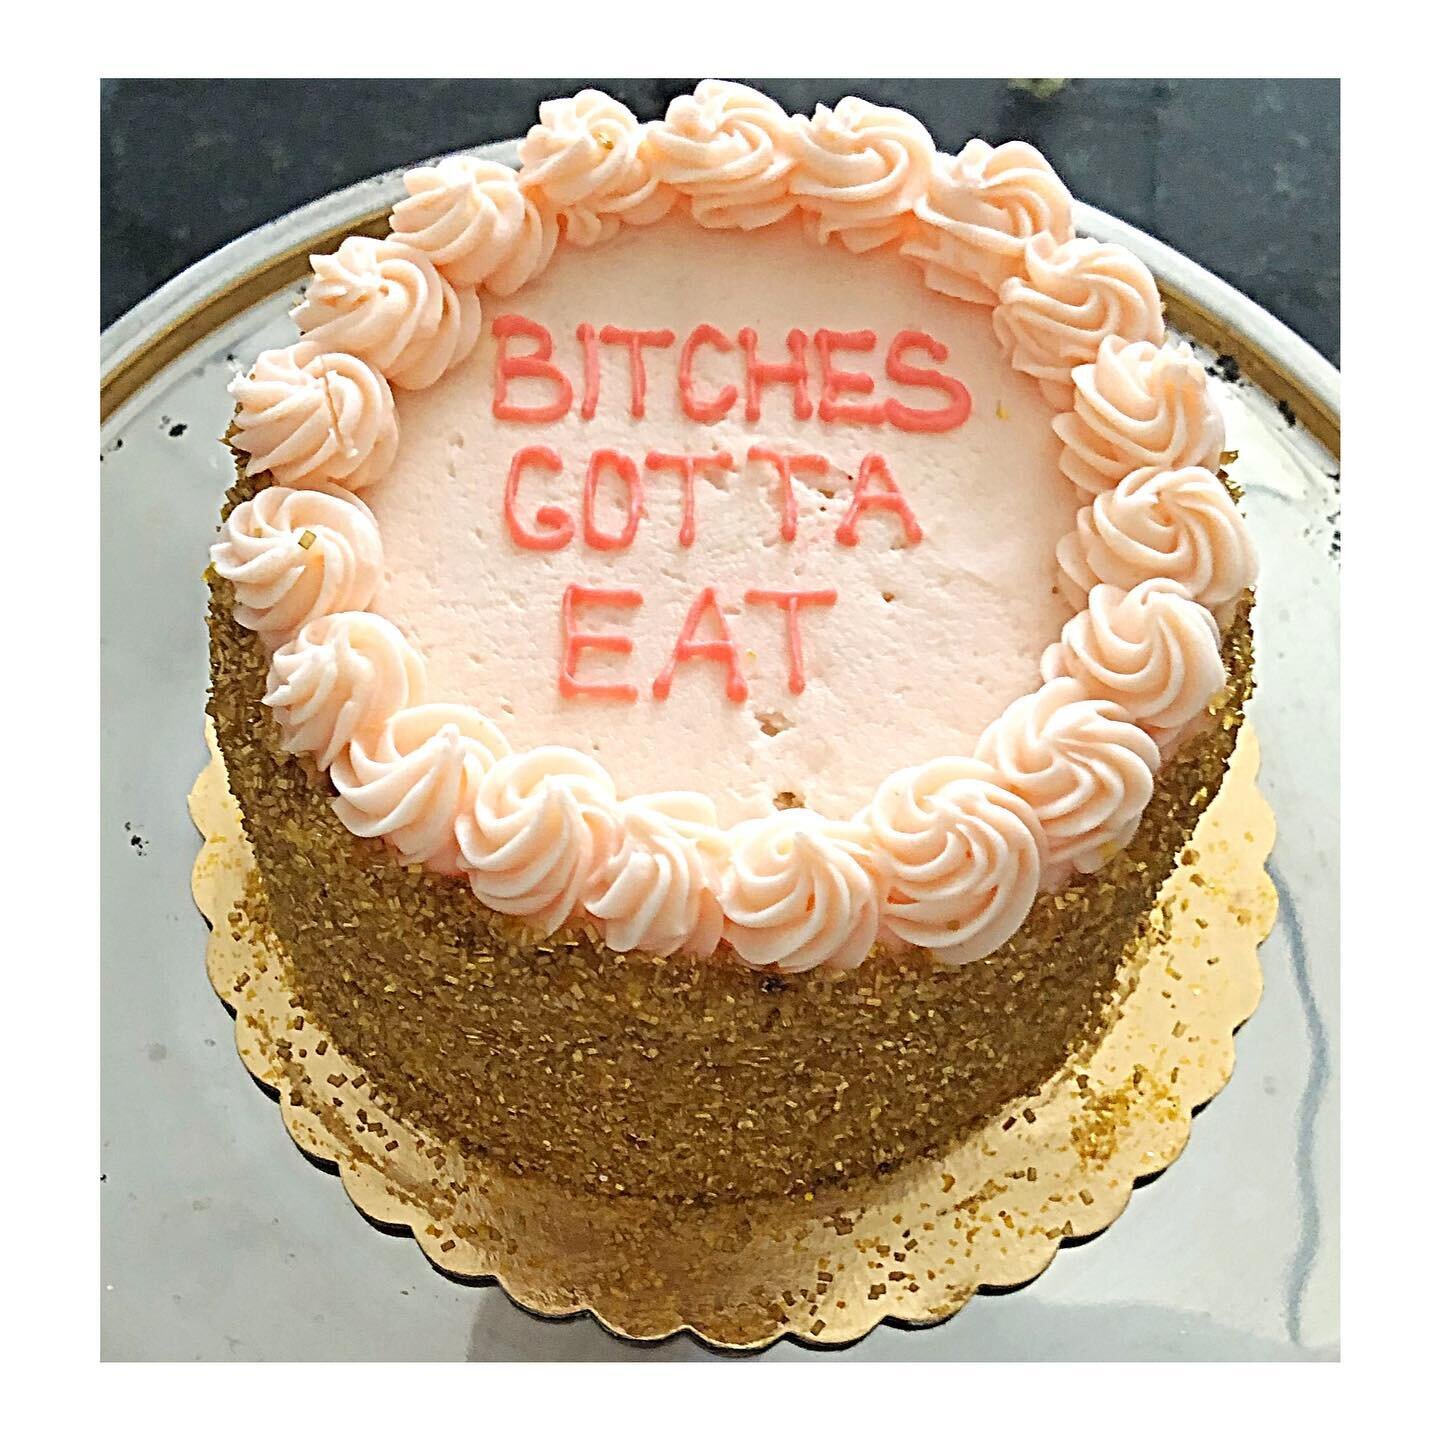 Yup. 💯
I bought myself a cake because Thursday is my 2nd quarantine birthday and I plan on eating all the cakes all week in celebration/mourning.
Thank you @drunkbakers for starting my bday week off in the tastiest damn style 🙌🏽🎉❤️